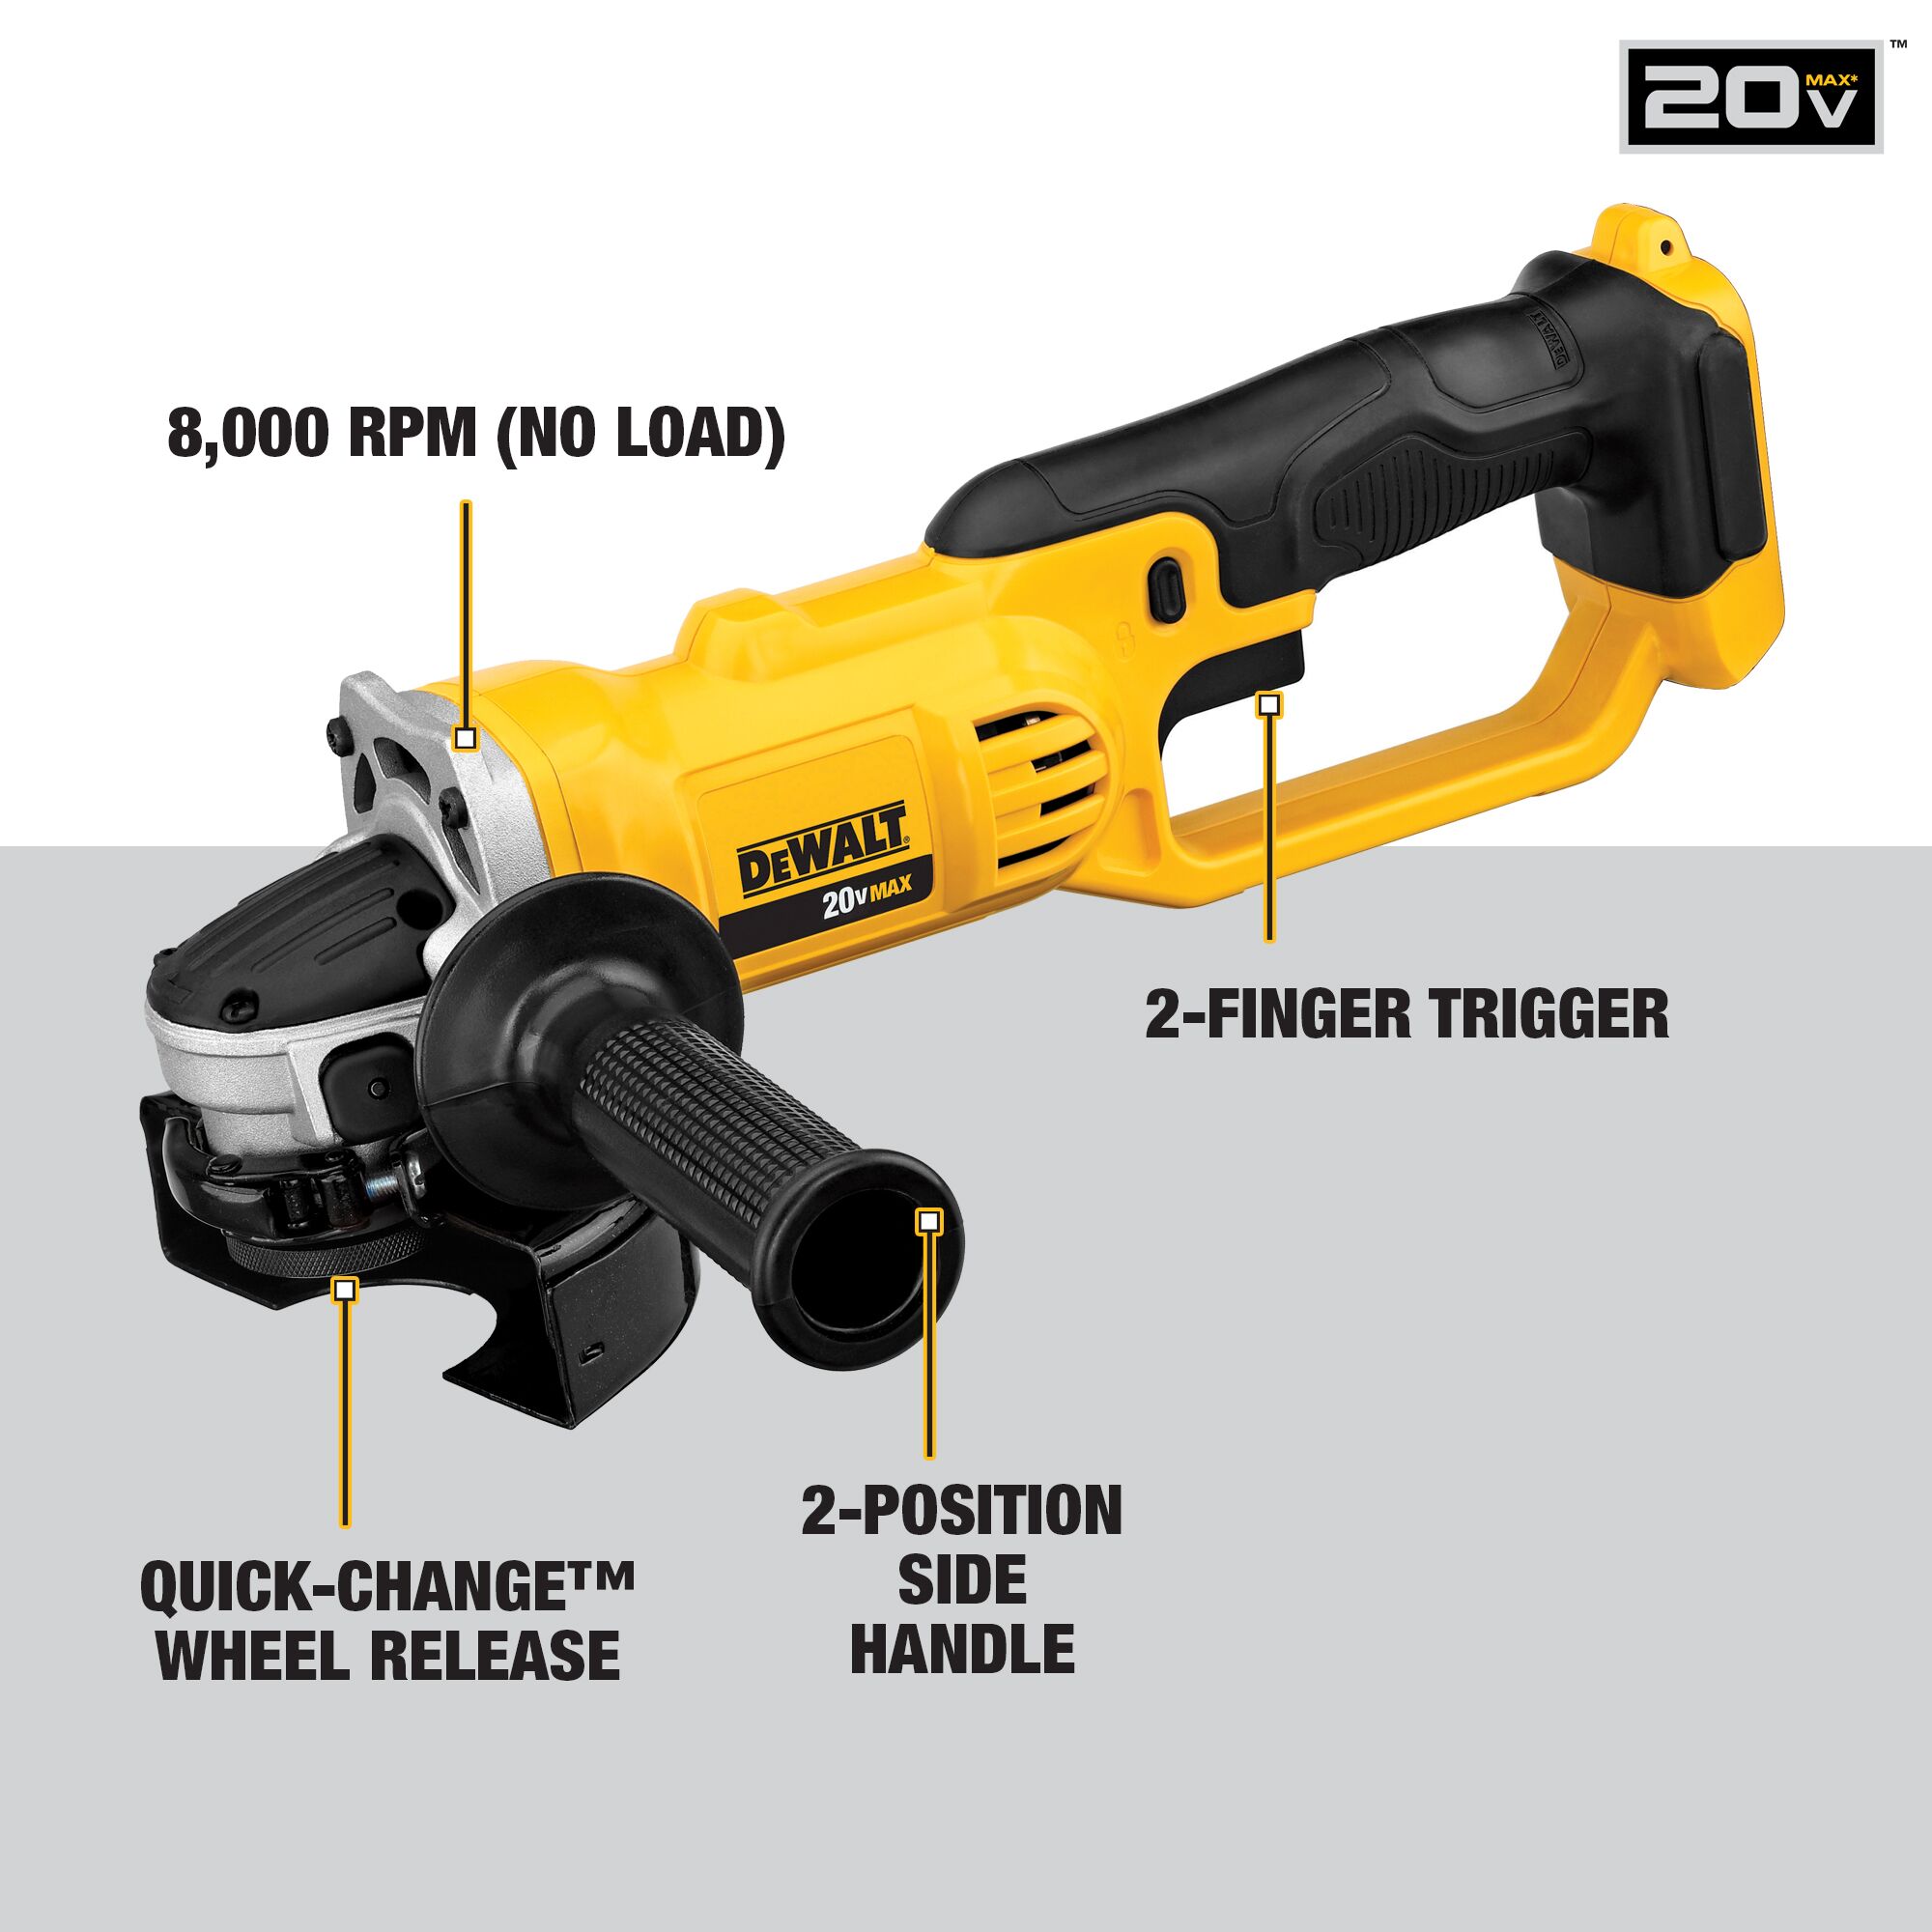 DEWALT 4.5-in 20-volt Max Trigger Cordless Angle Grinder (Tool Only) in Angle Grinders department at Lowes.com